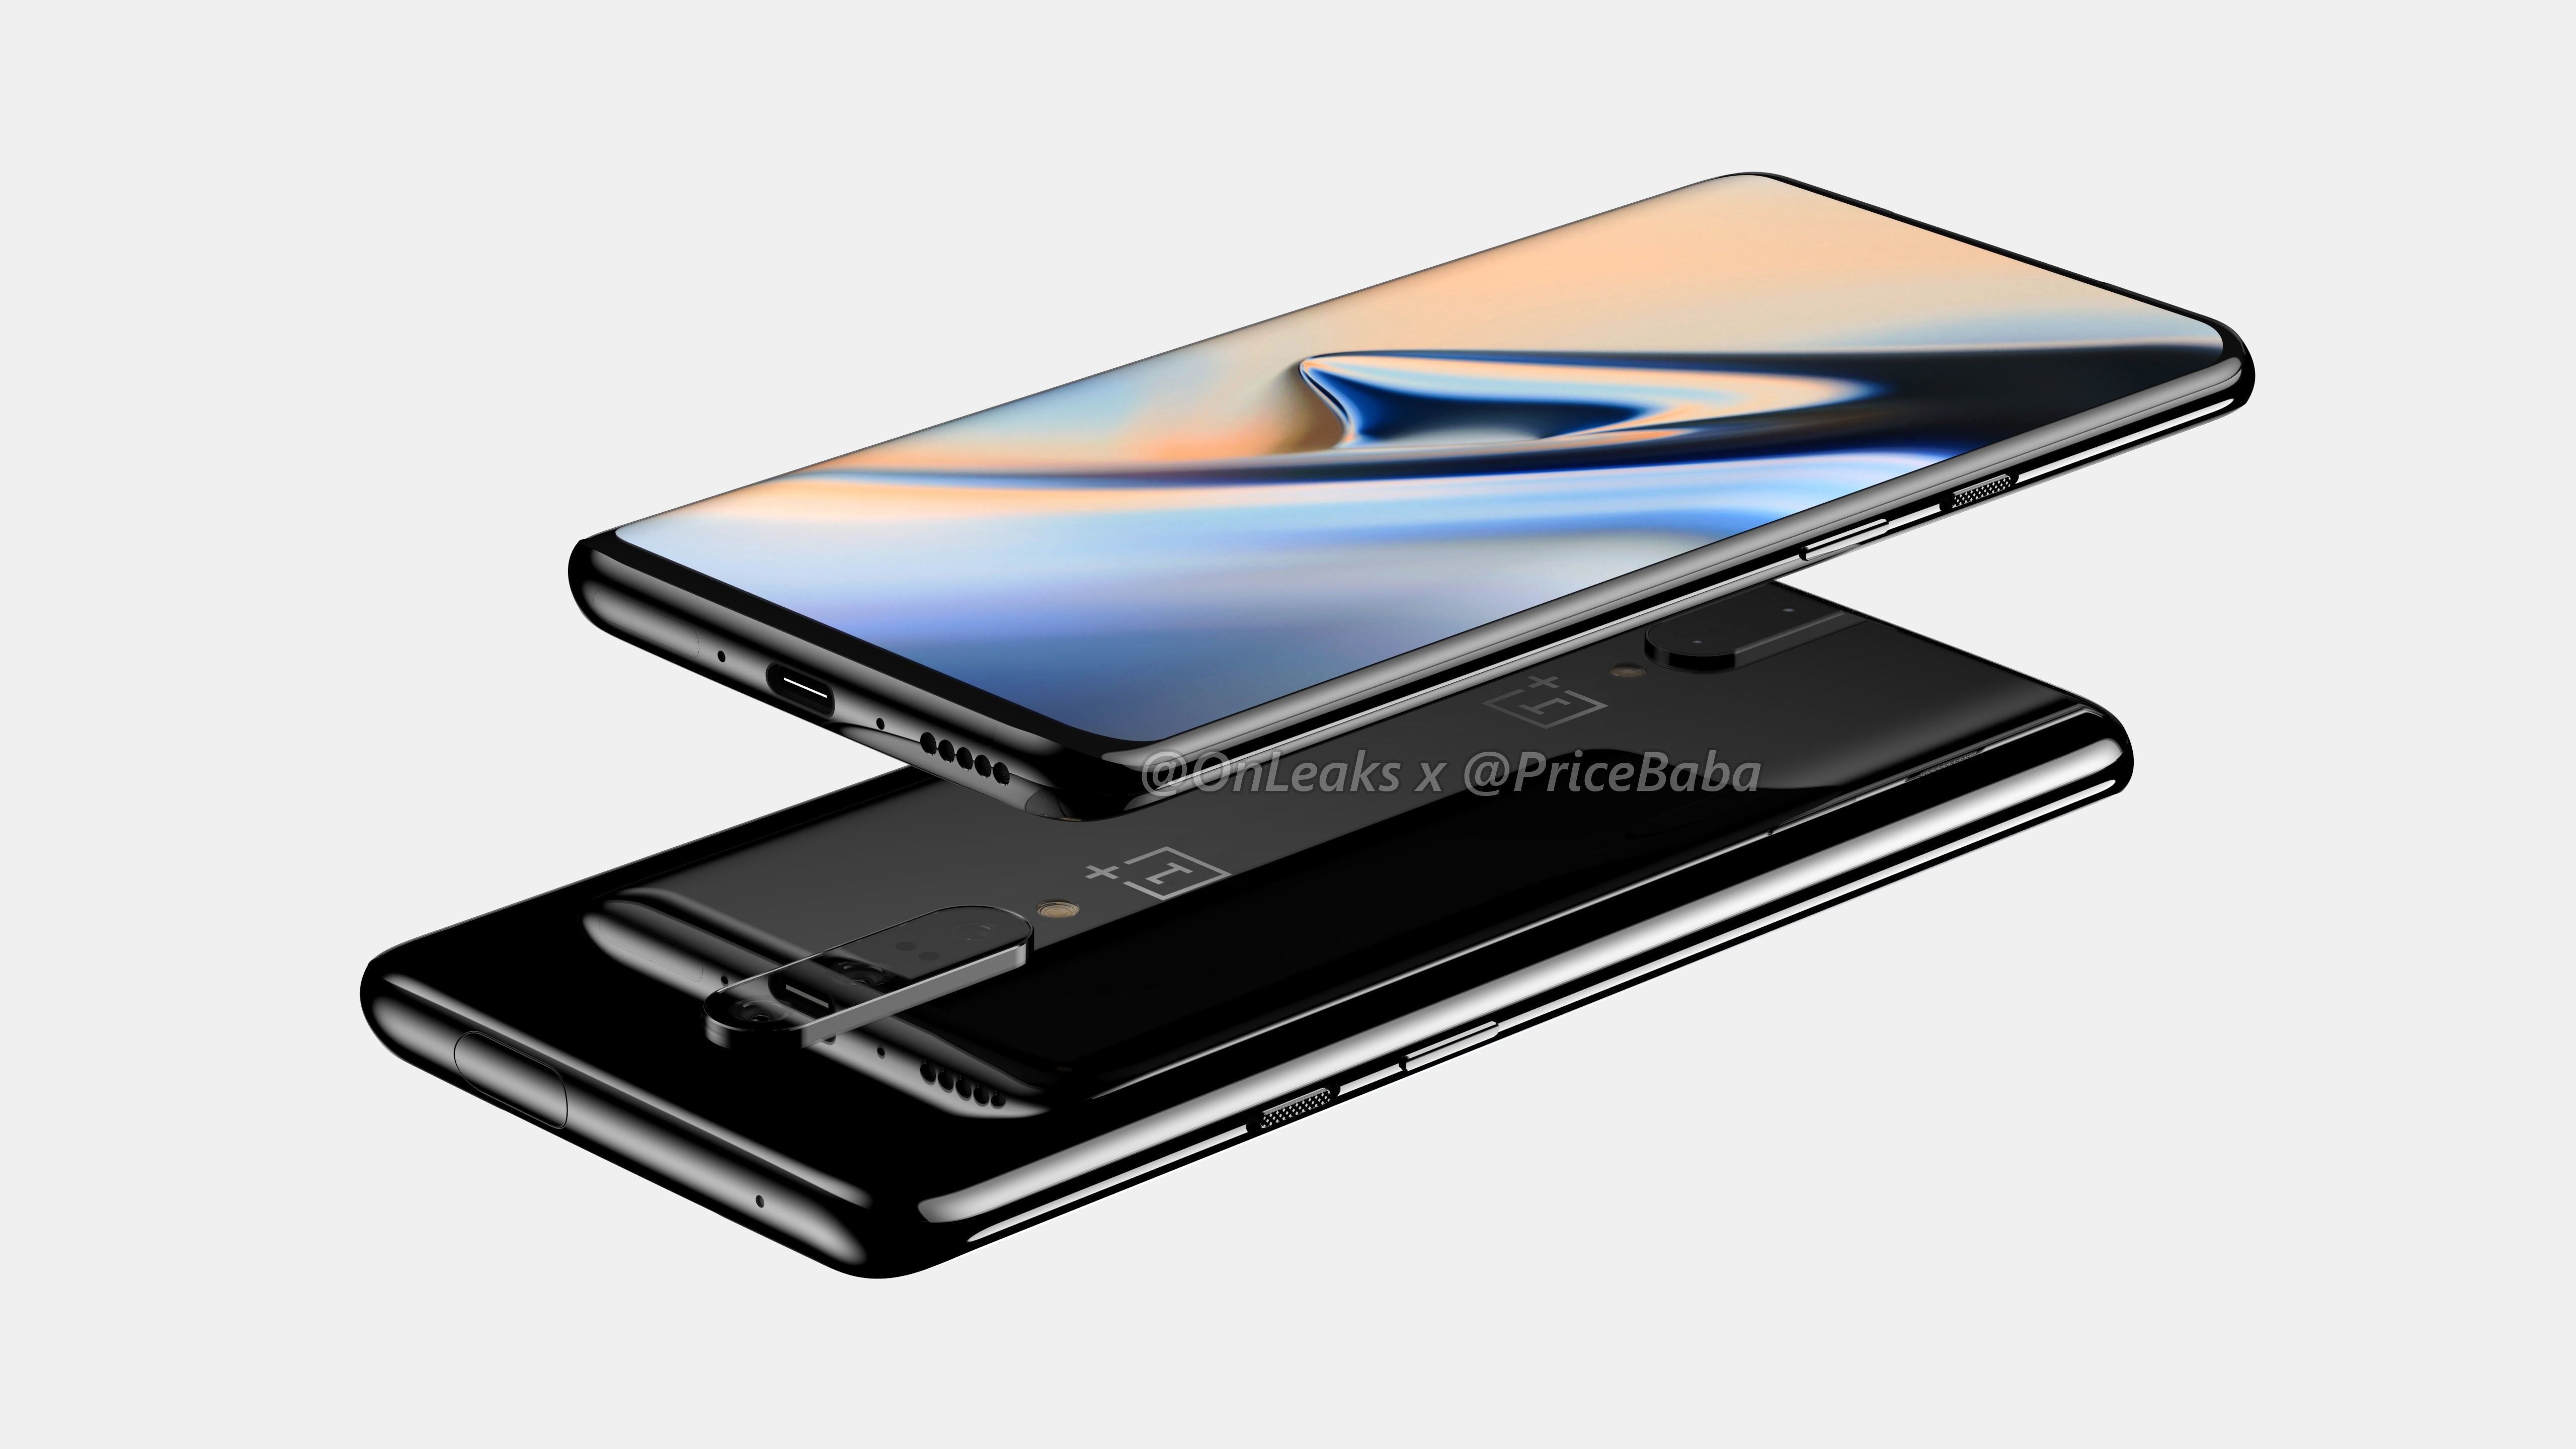 OnePlus 7 Pro rumor review: price, release date, and new features